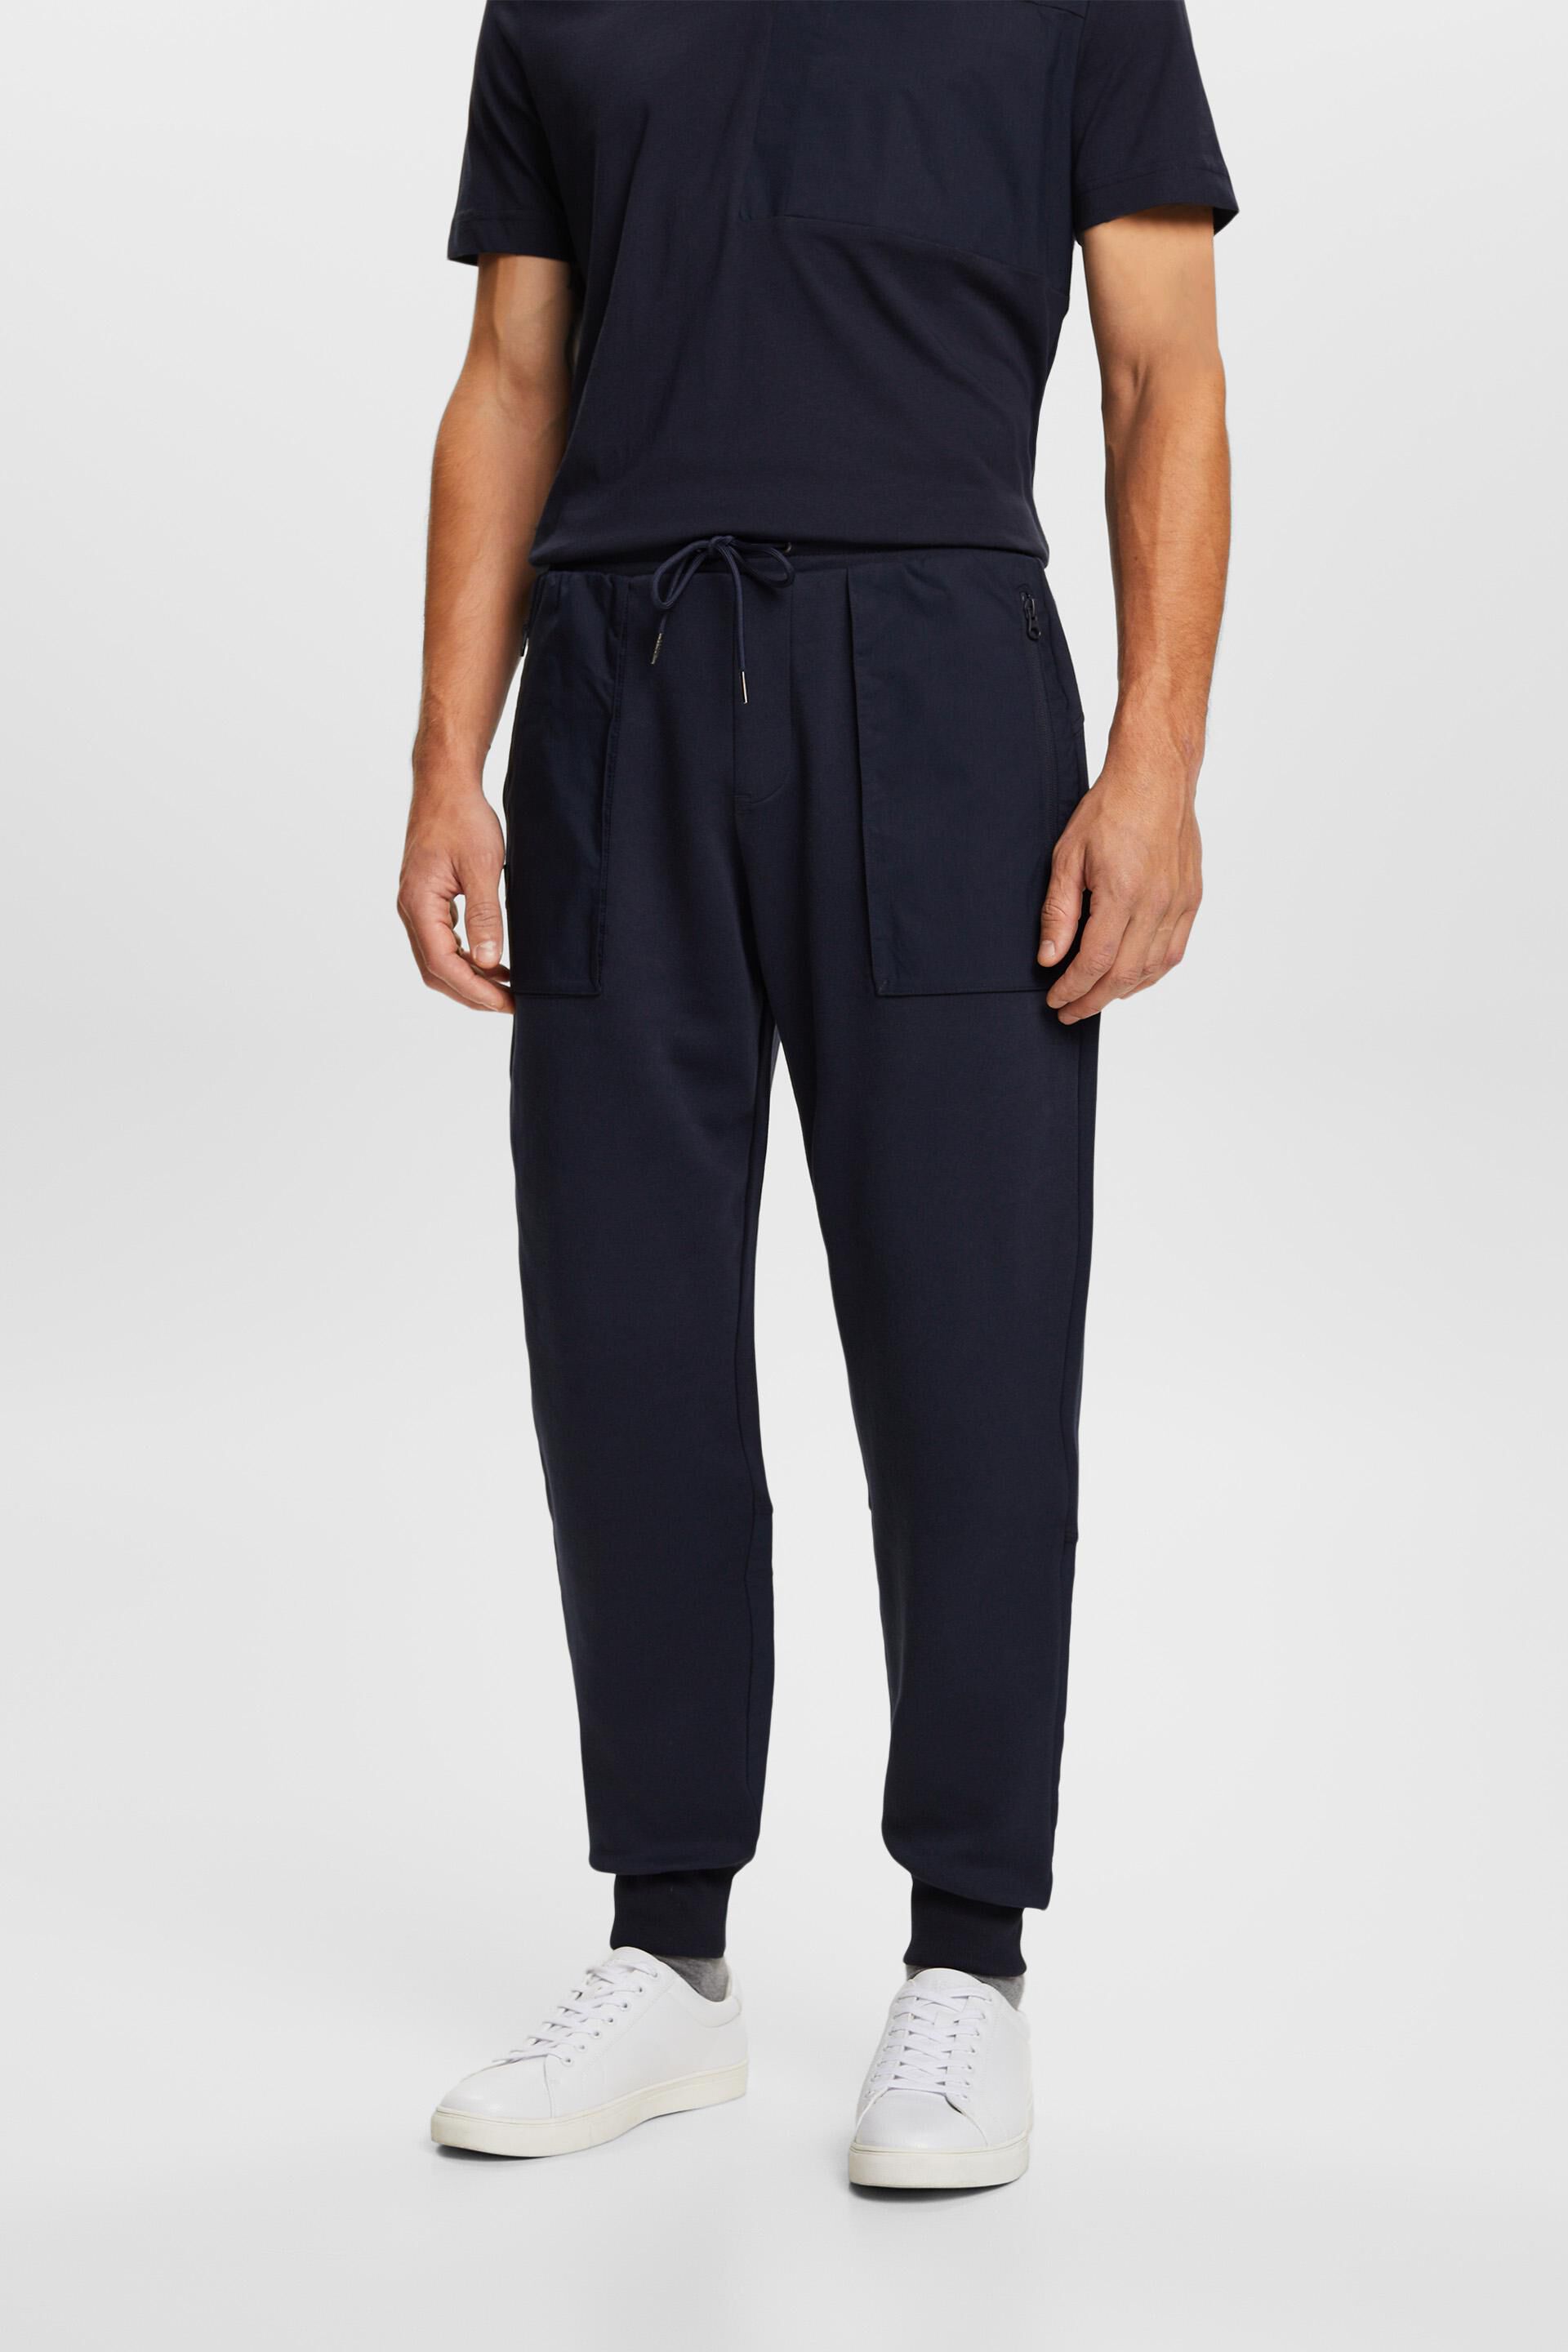 Esprit joggers in mixed Fashion material